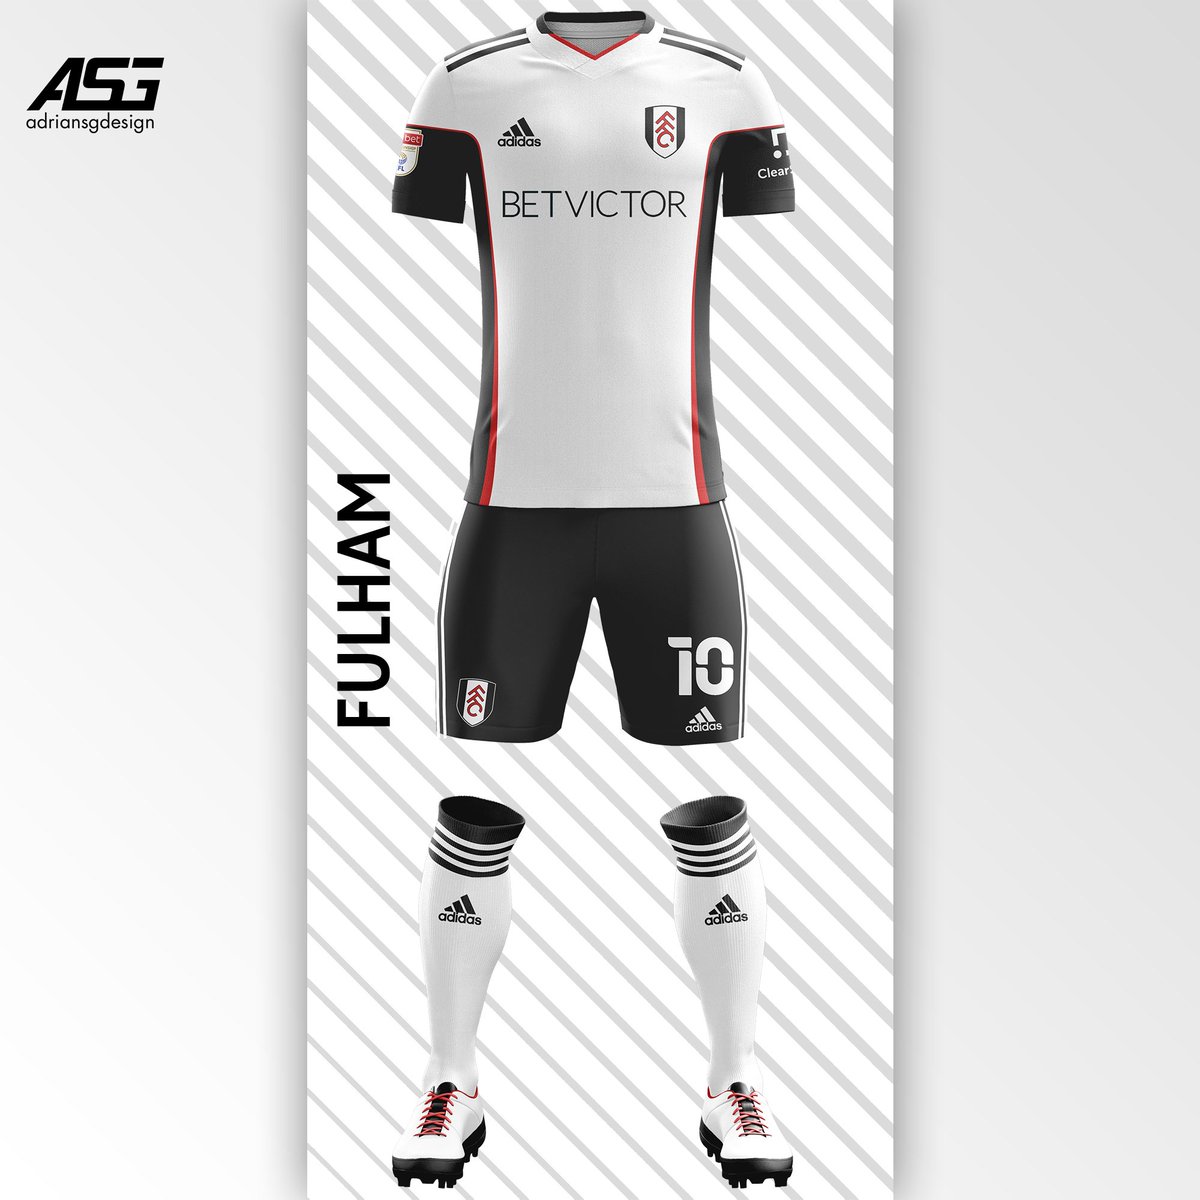 Fulham  @FulhamFC Black on the sides which finish up on the sleeves with red on the sides of the black.